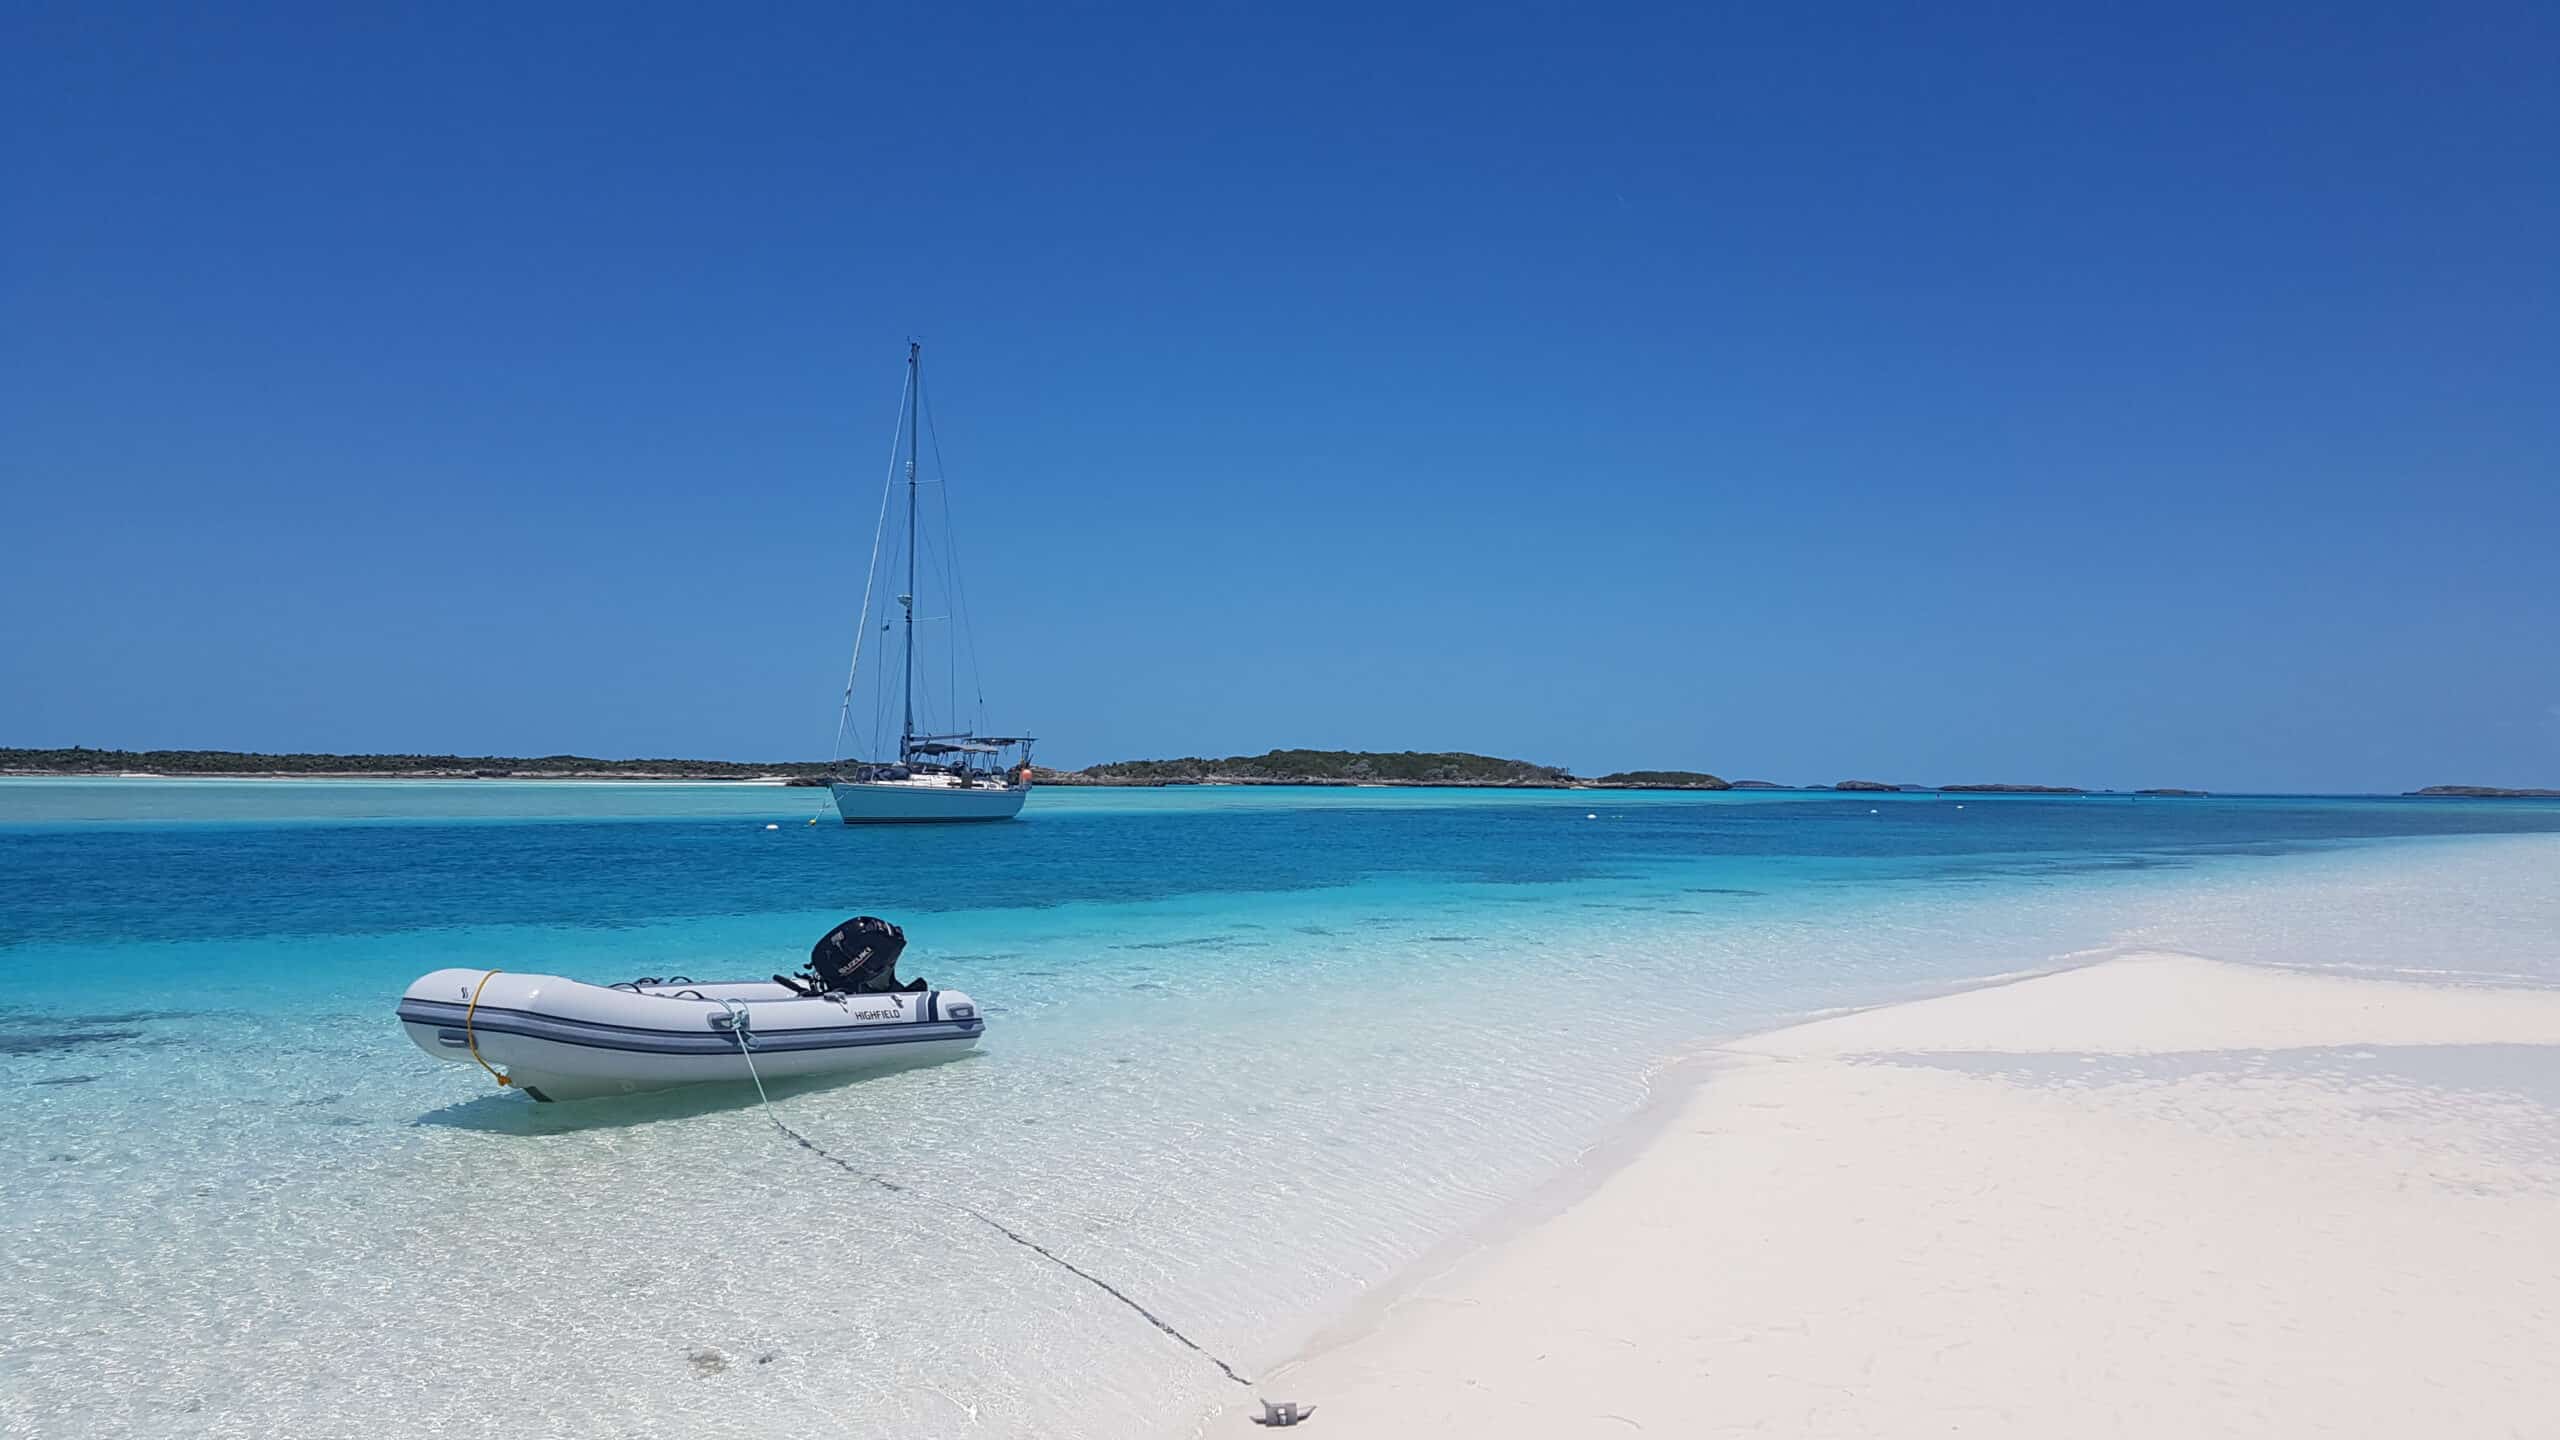 Sail to the beautiful clear waters in the Bahamas; new ABYC E-13 standards are for lithium batteries on sailboats